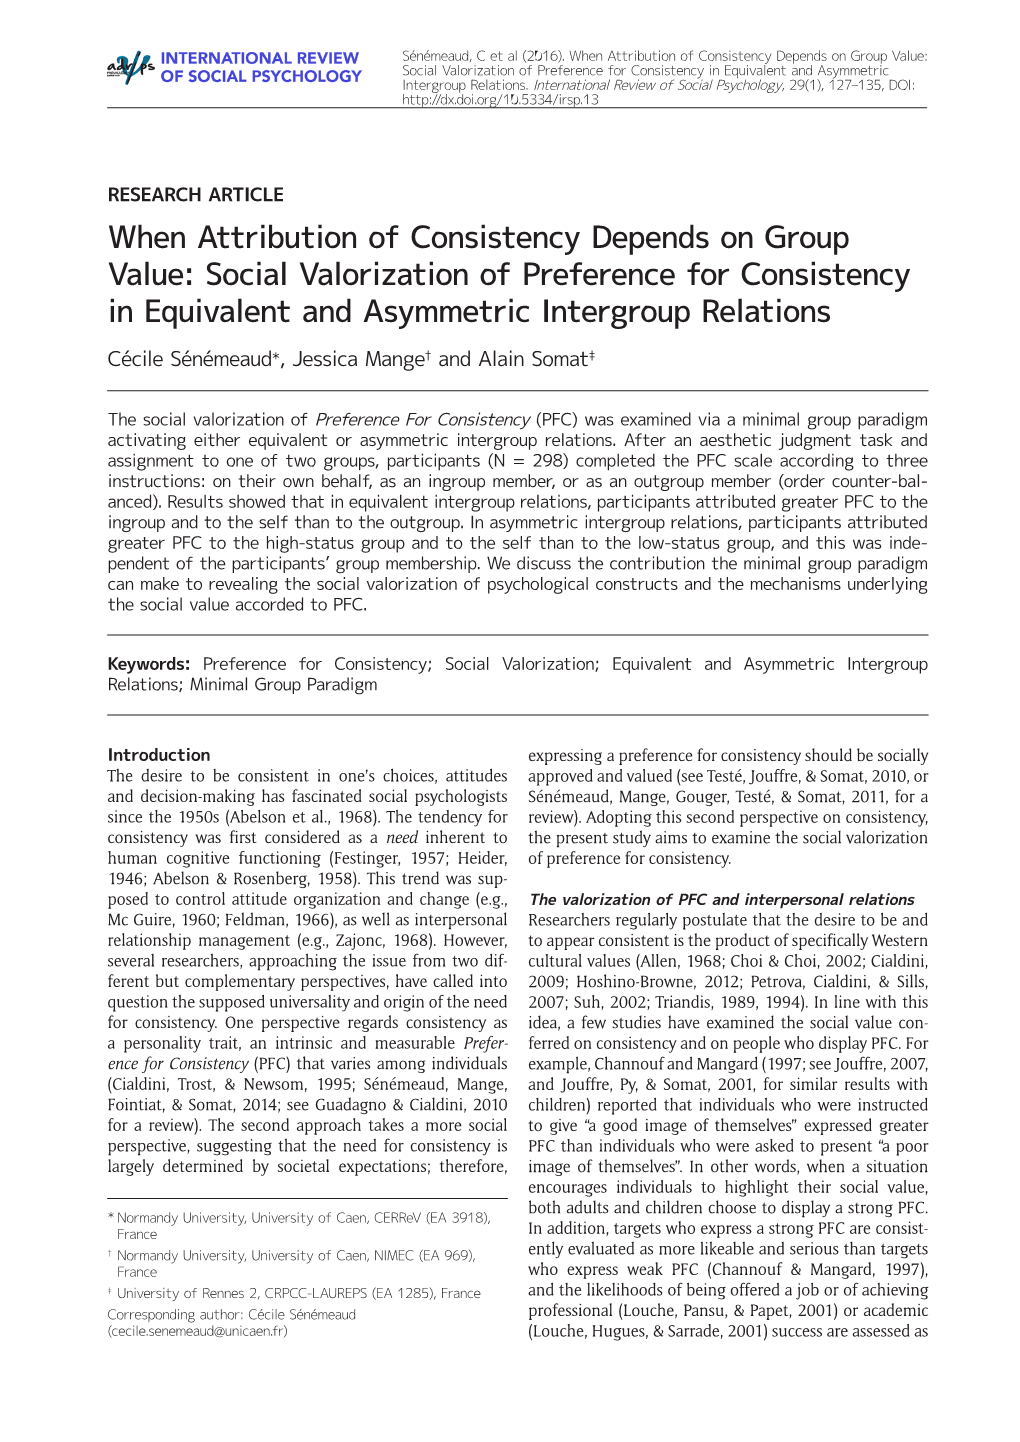 Social Valorization of Preference for Consistency in Equivalent and Asymmetric Intergroup Relations